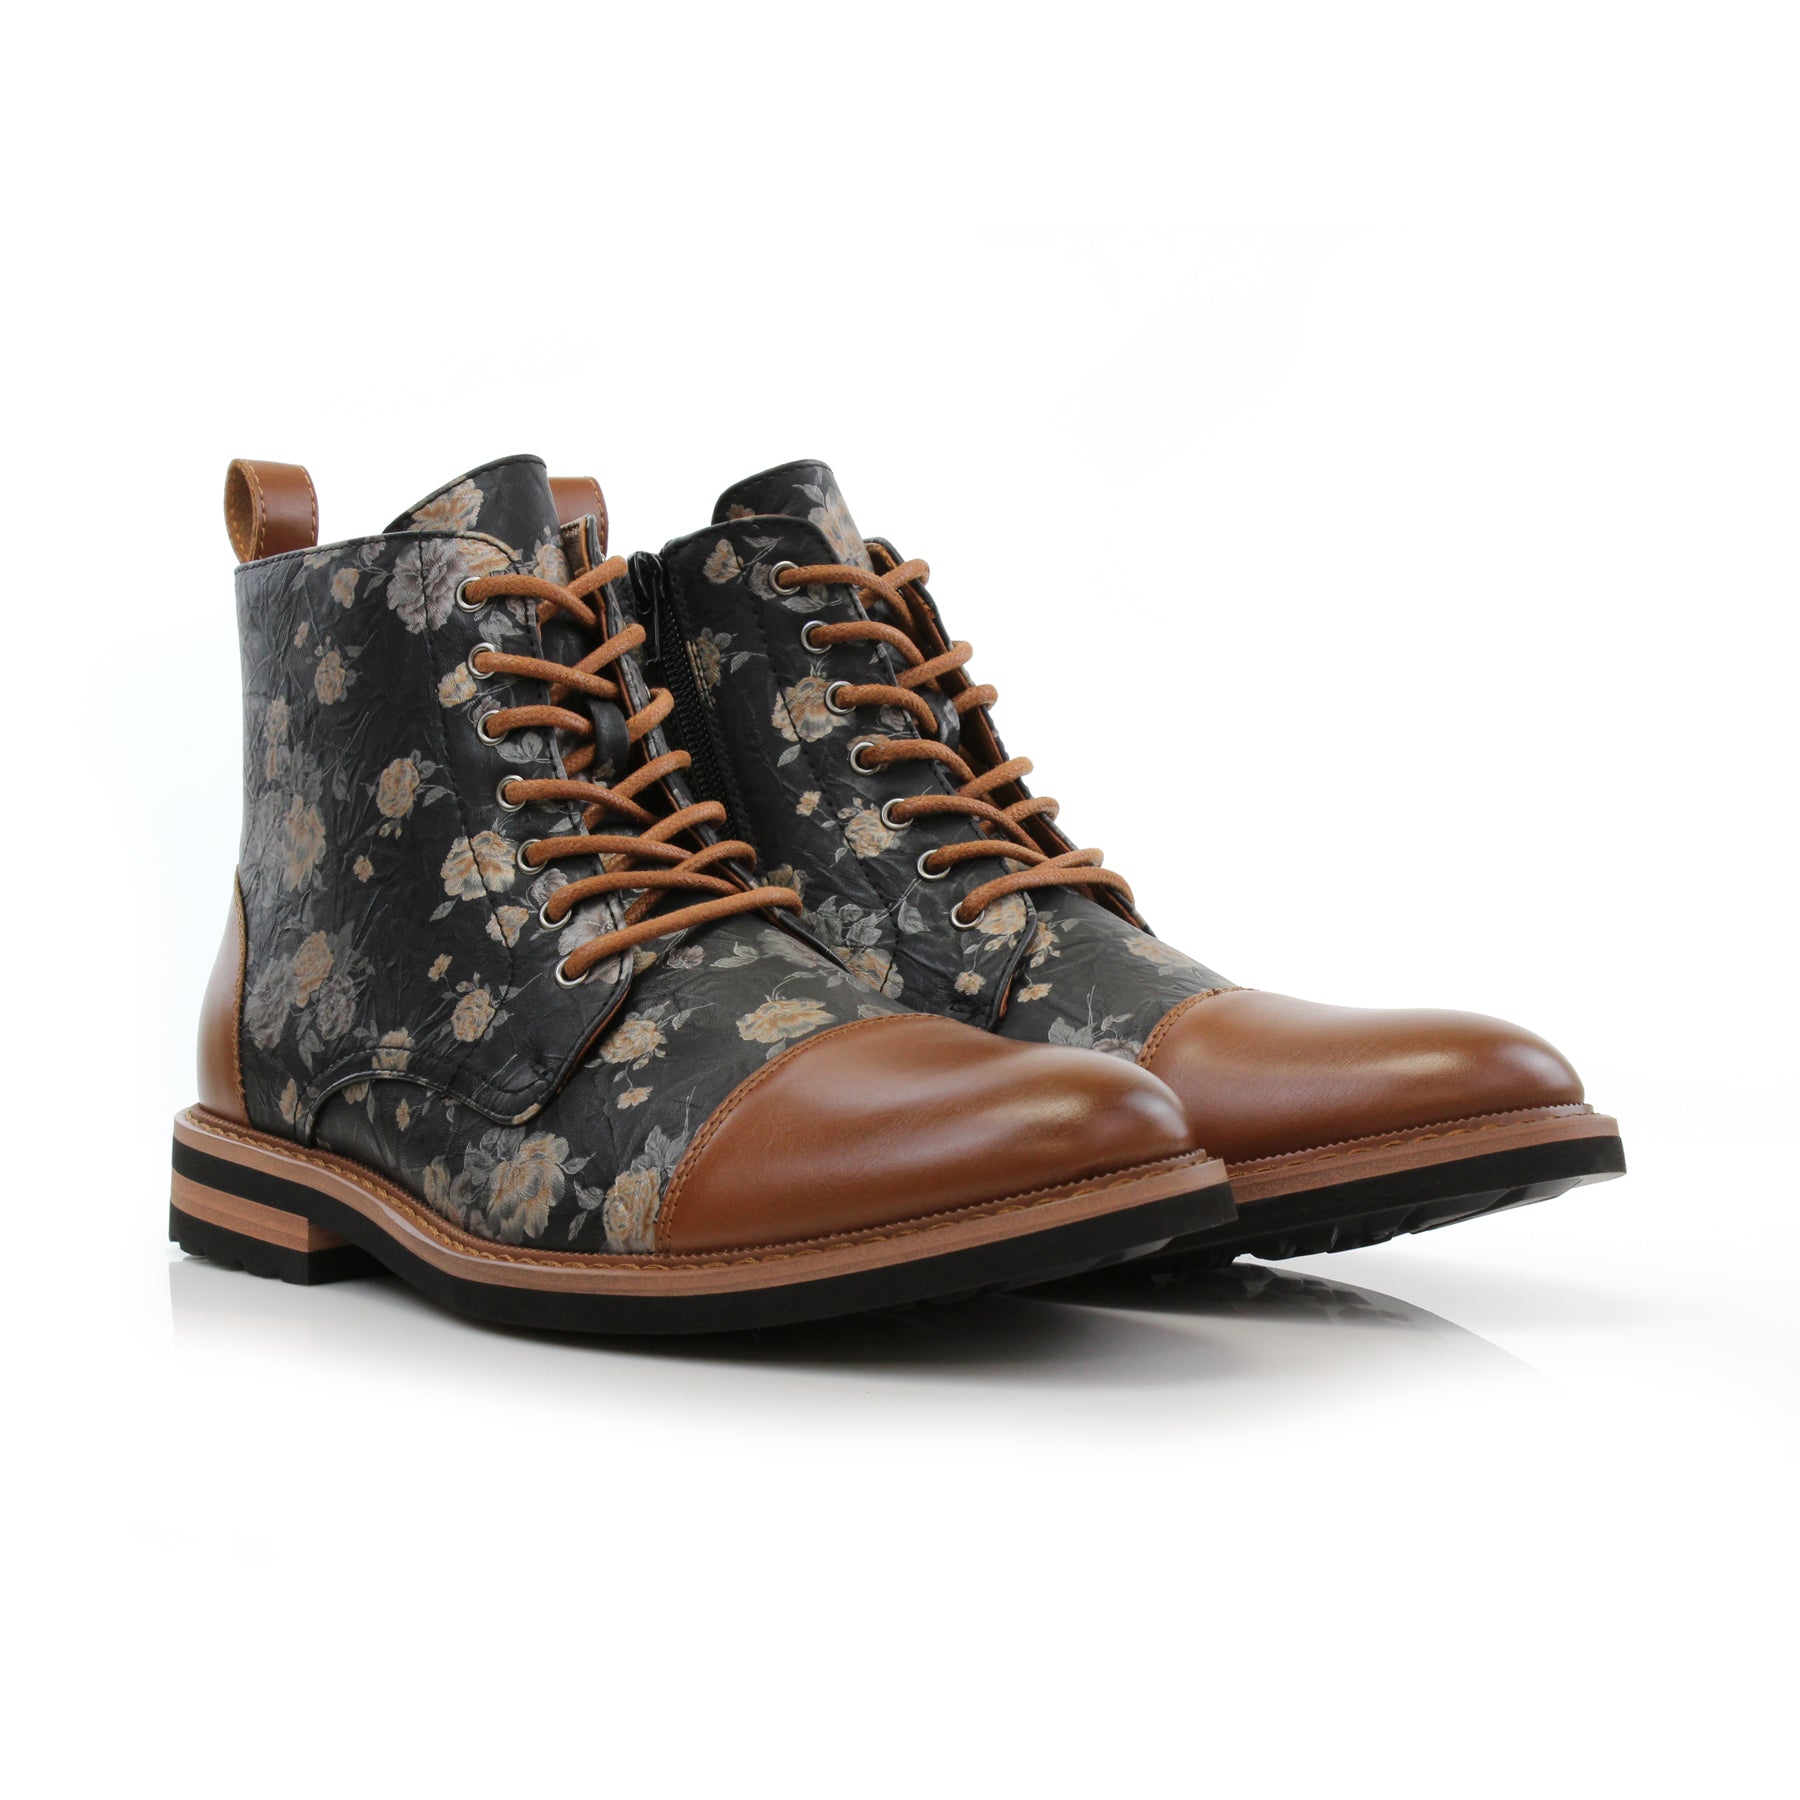 Floral High-Top Boot | Brooke by Polar Fox | Conal Footwear | Paired Angle View